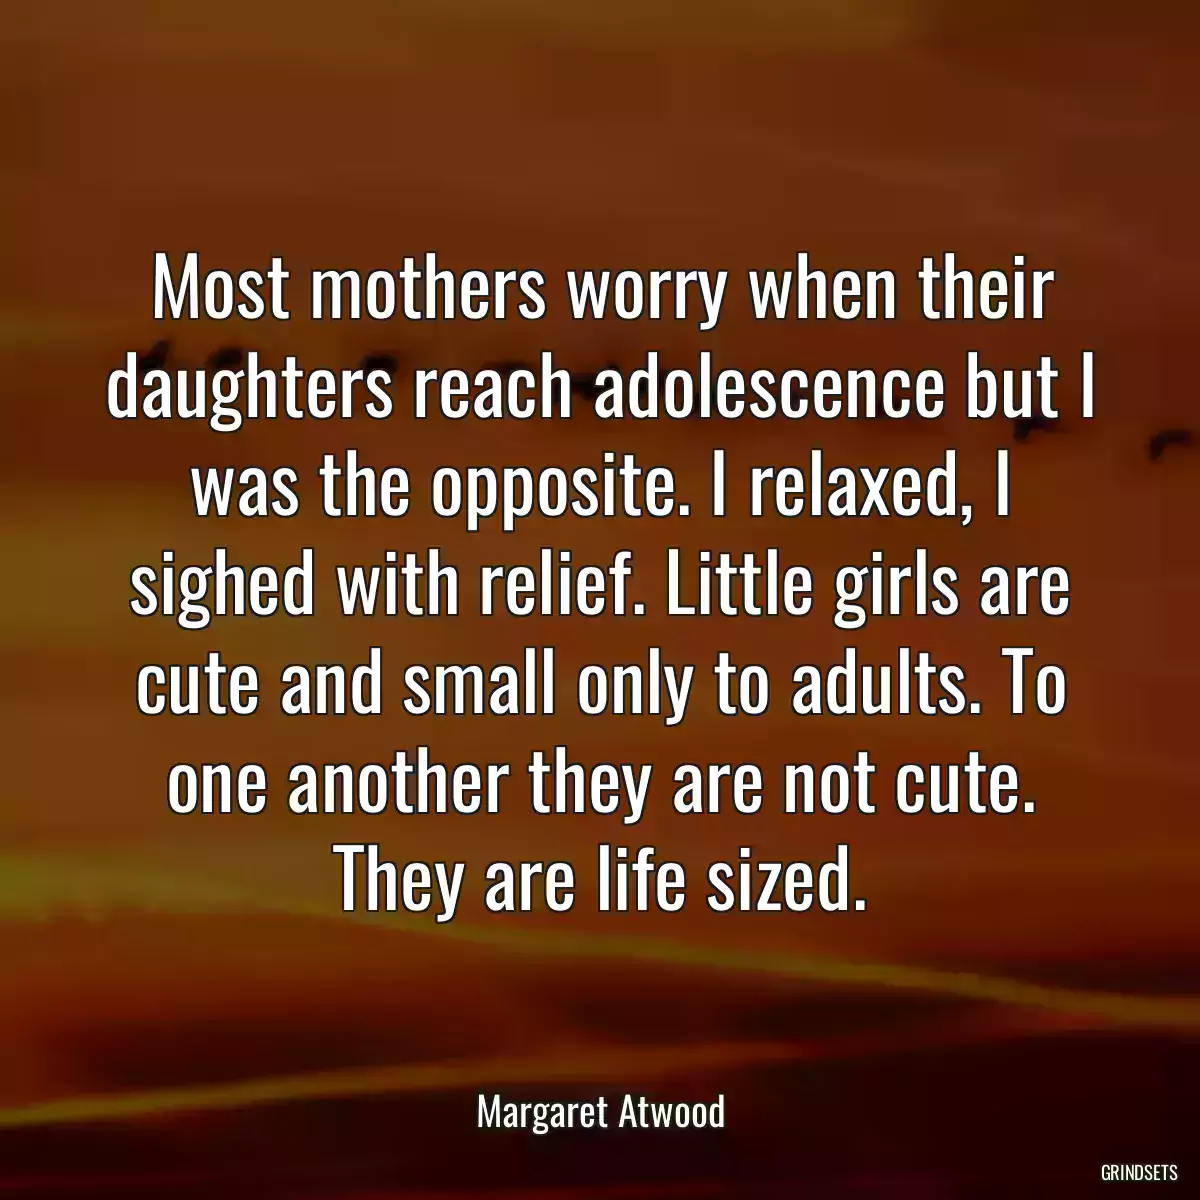 Most mothers worry when their daughters reach adolescence but I was the opposite. I relaxed, I sighed with relief. Little girls are cute and small only to adults. To one another they are not cute. They are life sized.